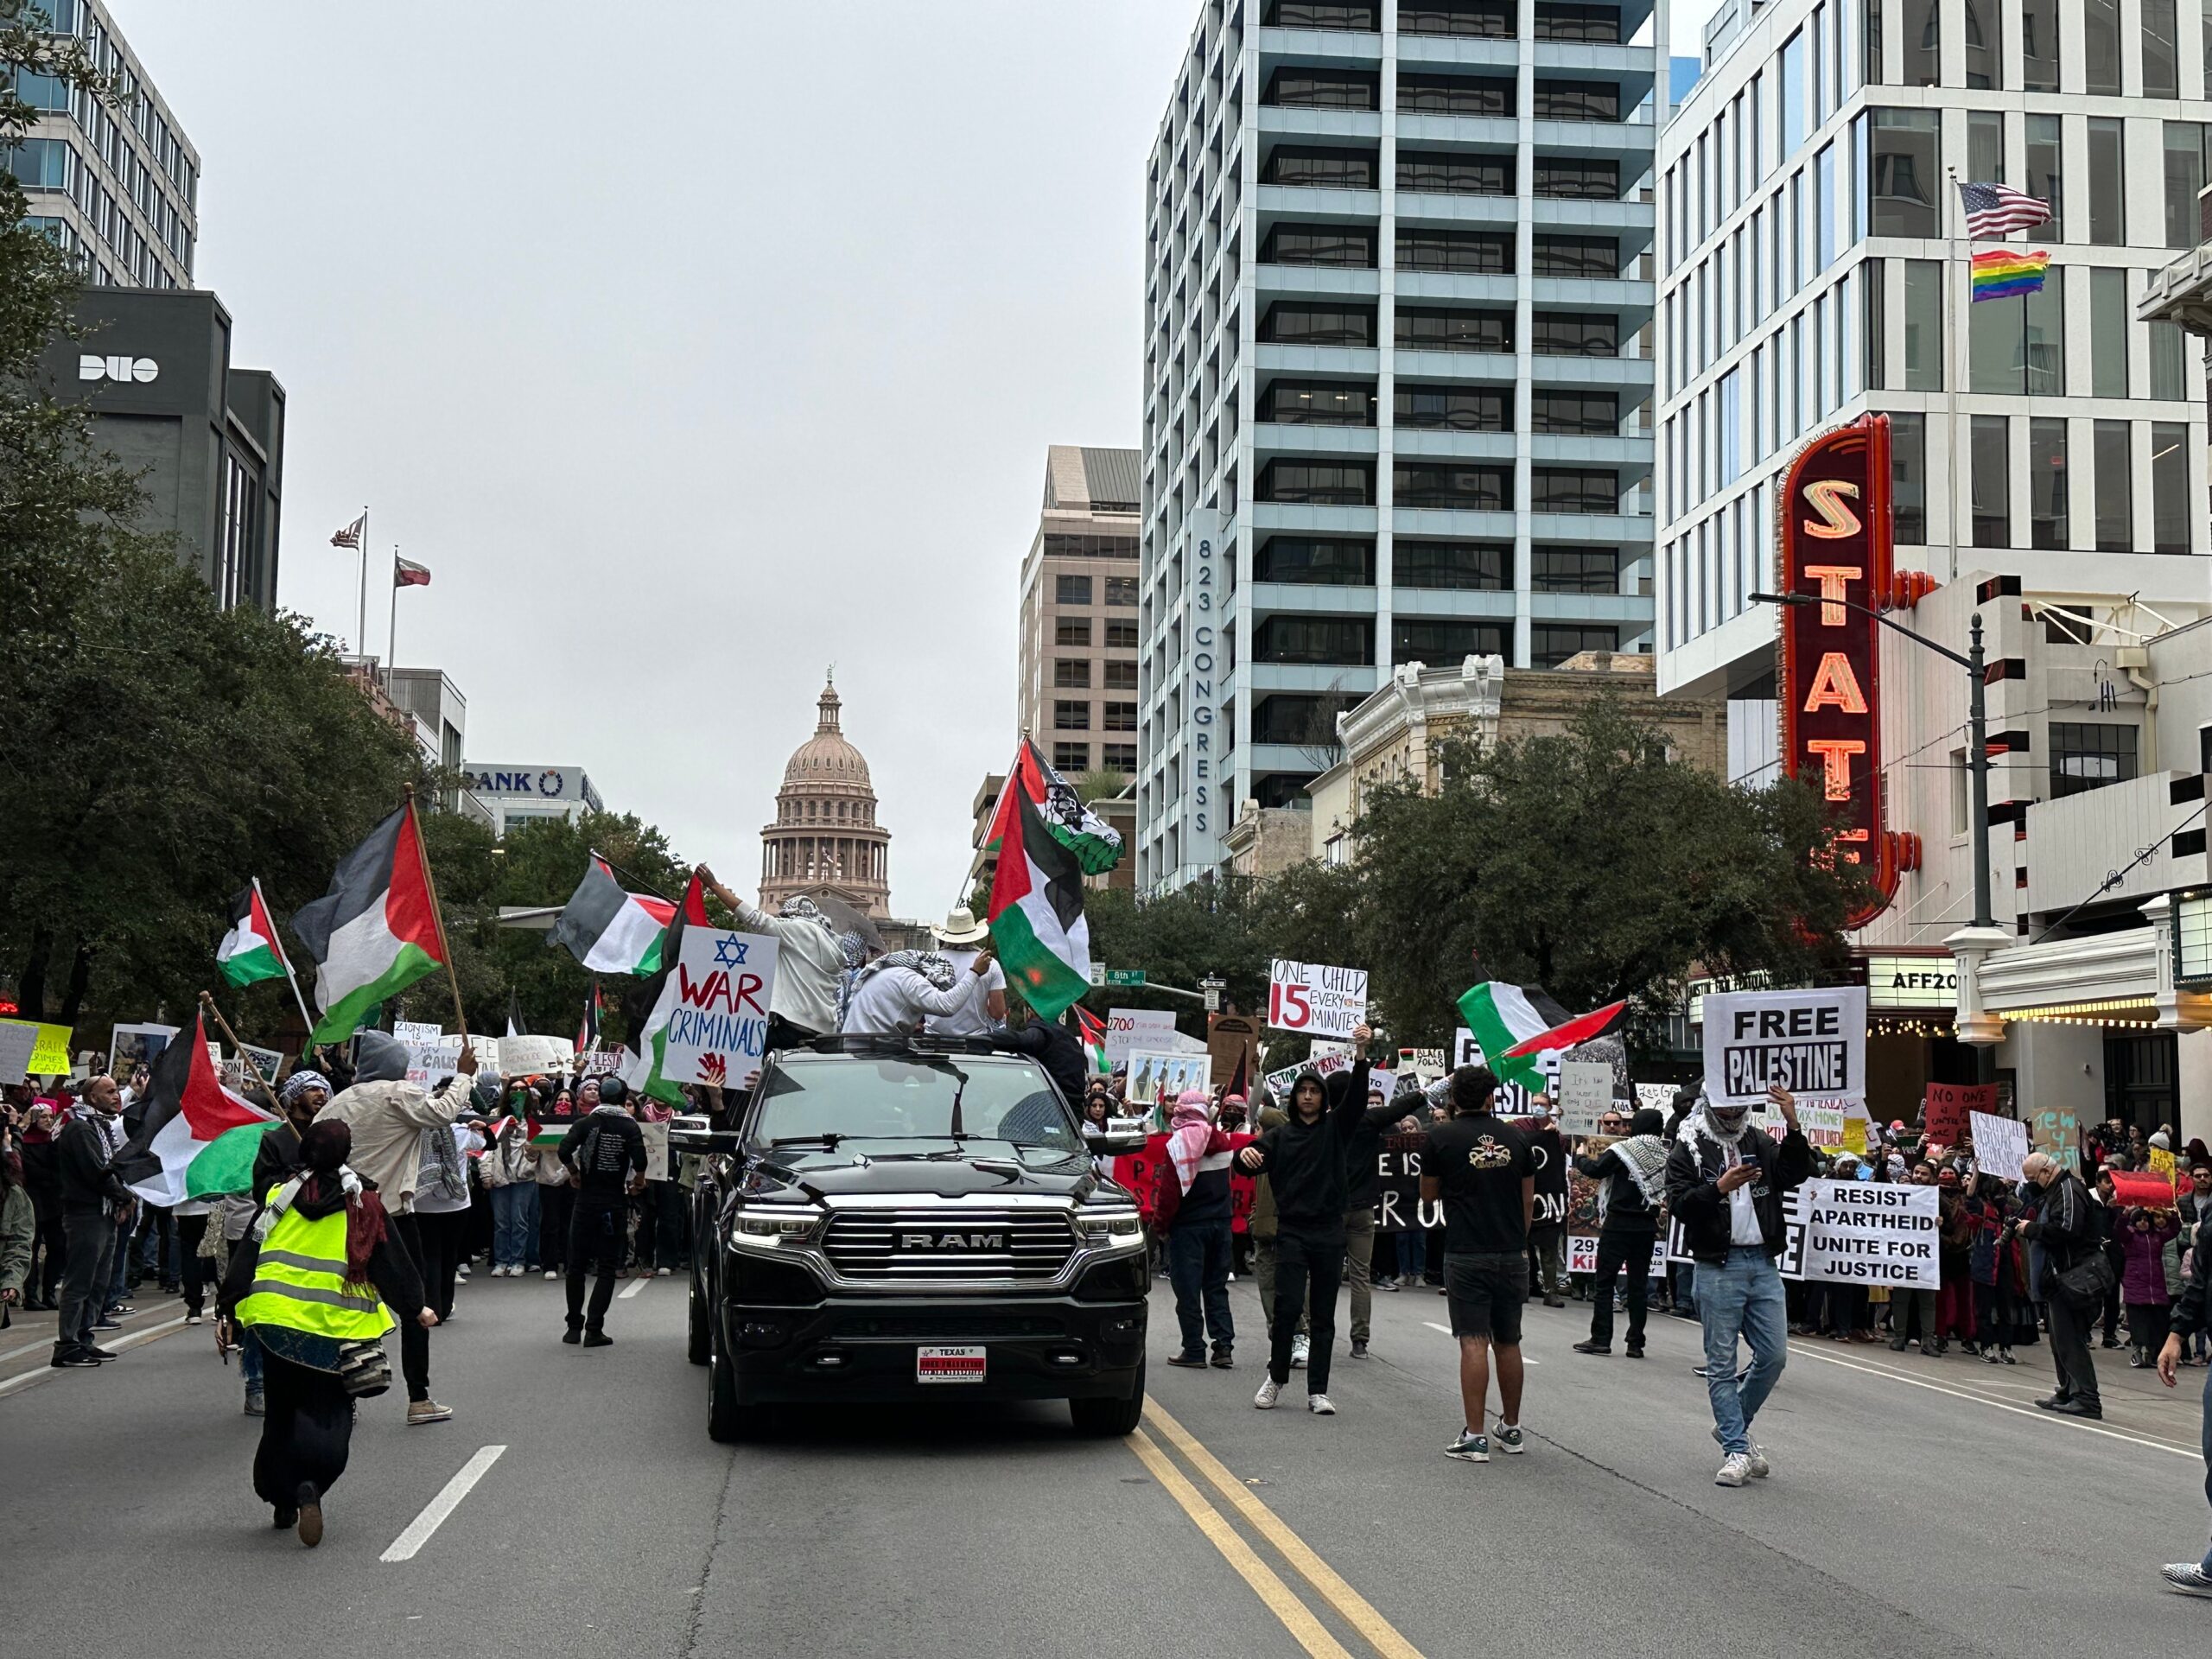 Thousands march with Pro-Palestine signs and Palestinian flags in a protest demanding a ceasefire in Gaza. The Texas Capitol, State Theatre and other landmarks of downtown Austin are visible.